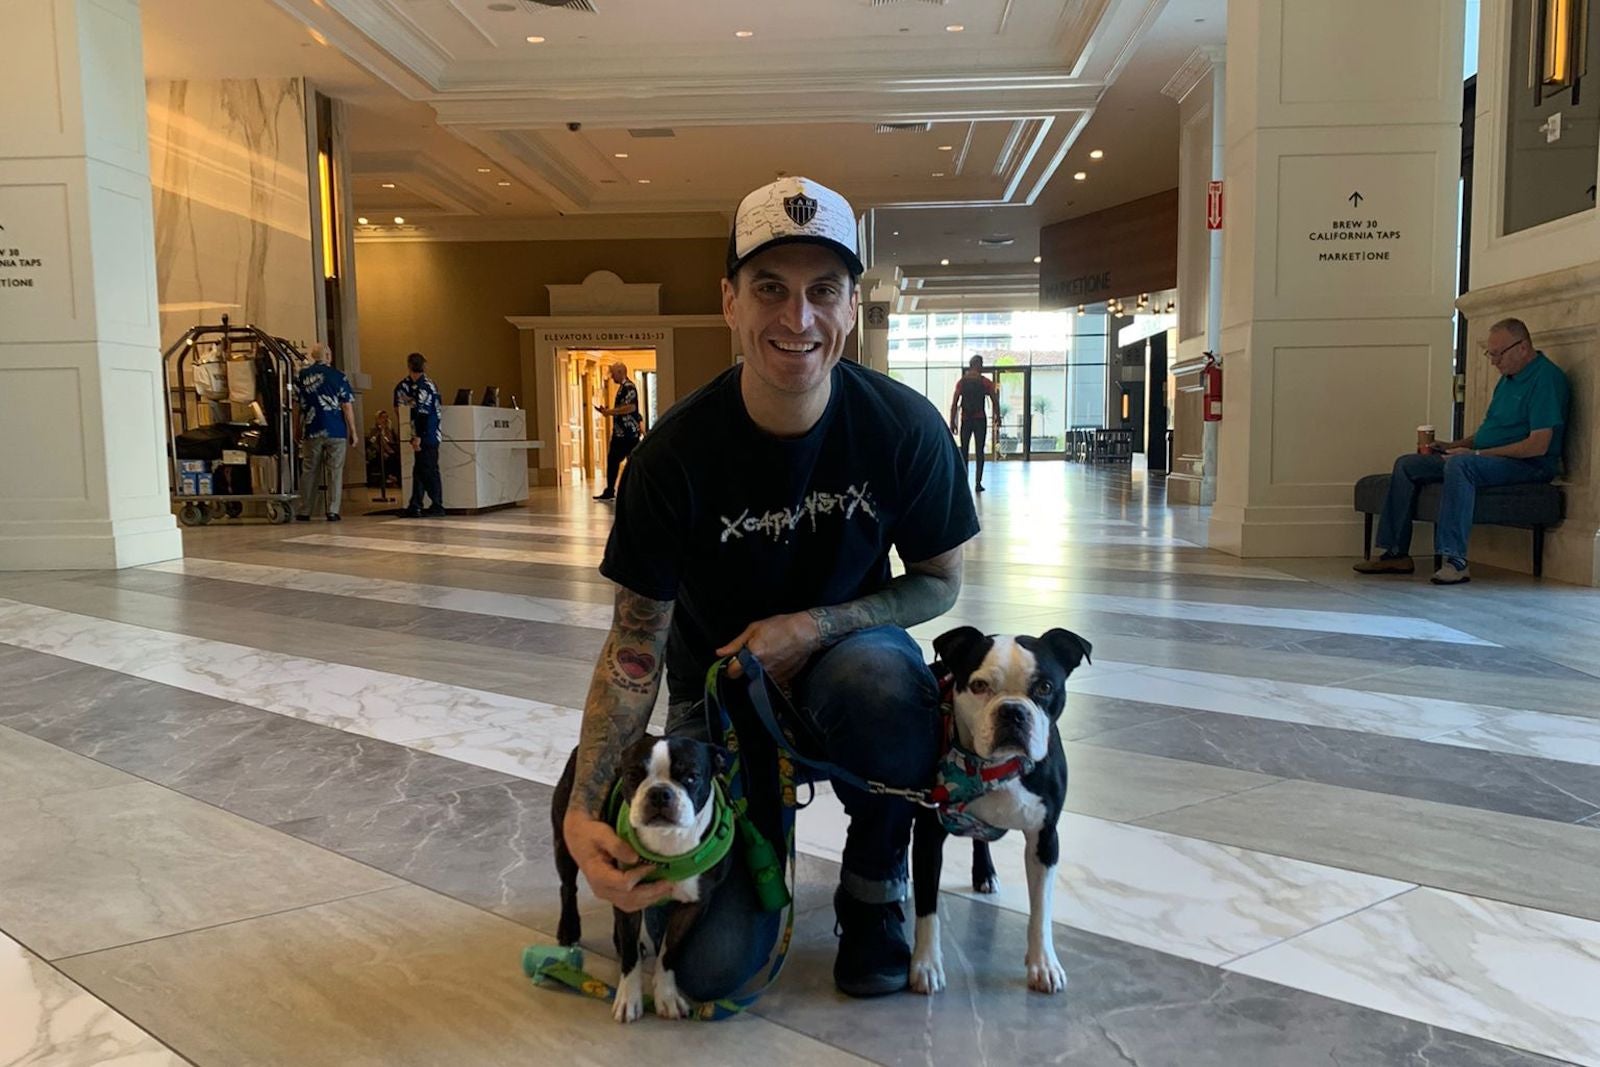 A man and two dogs inside a hotel lobby